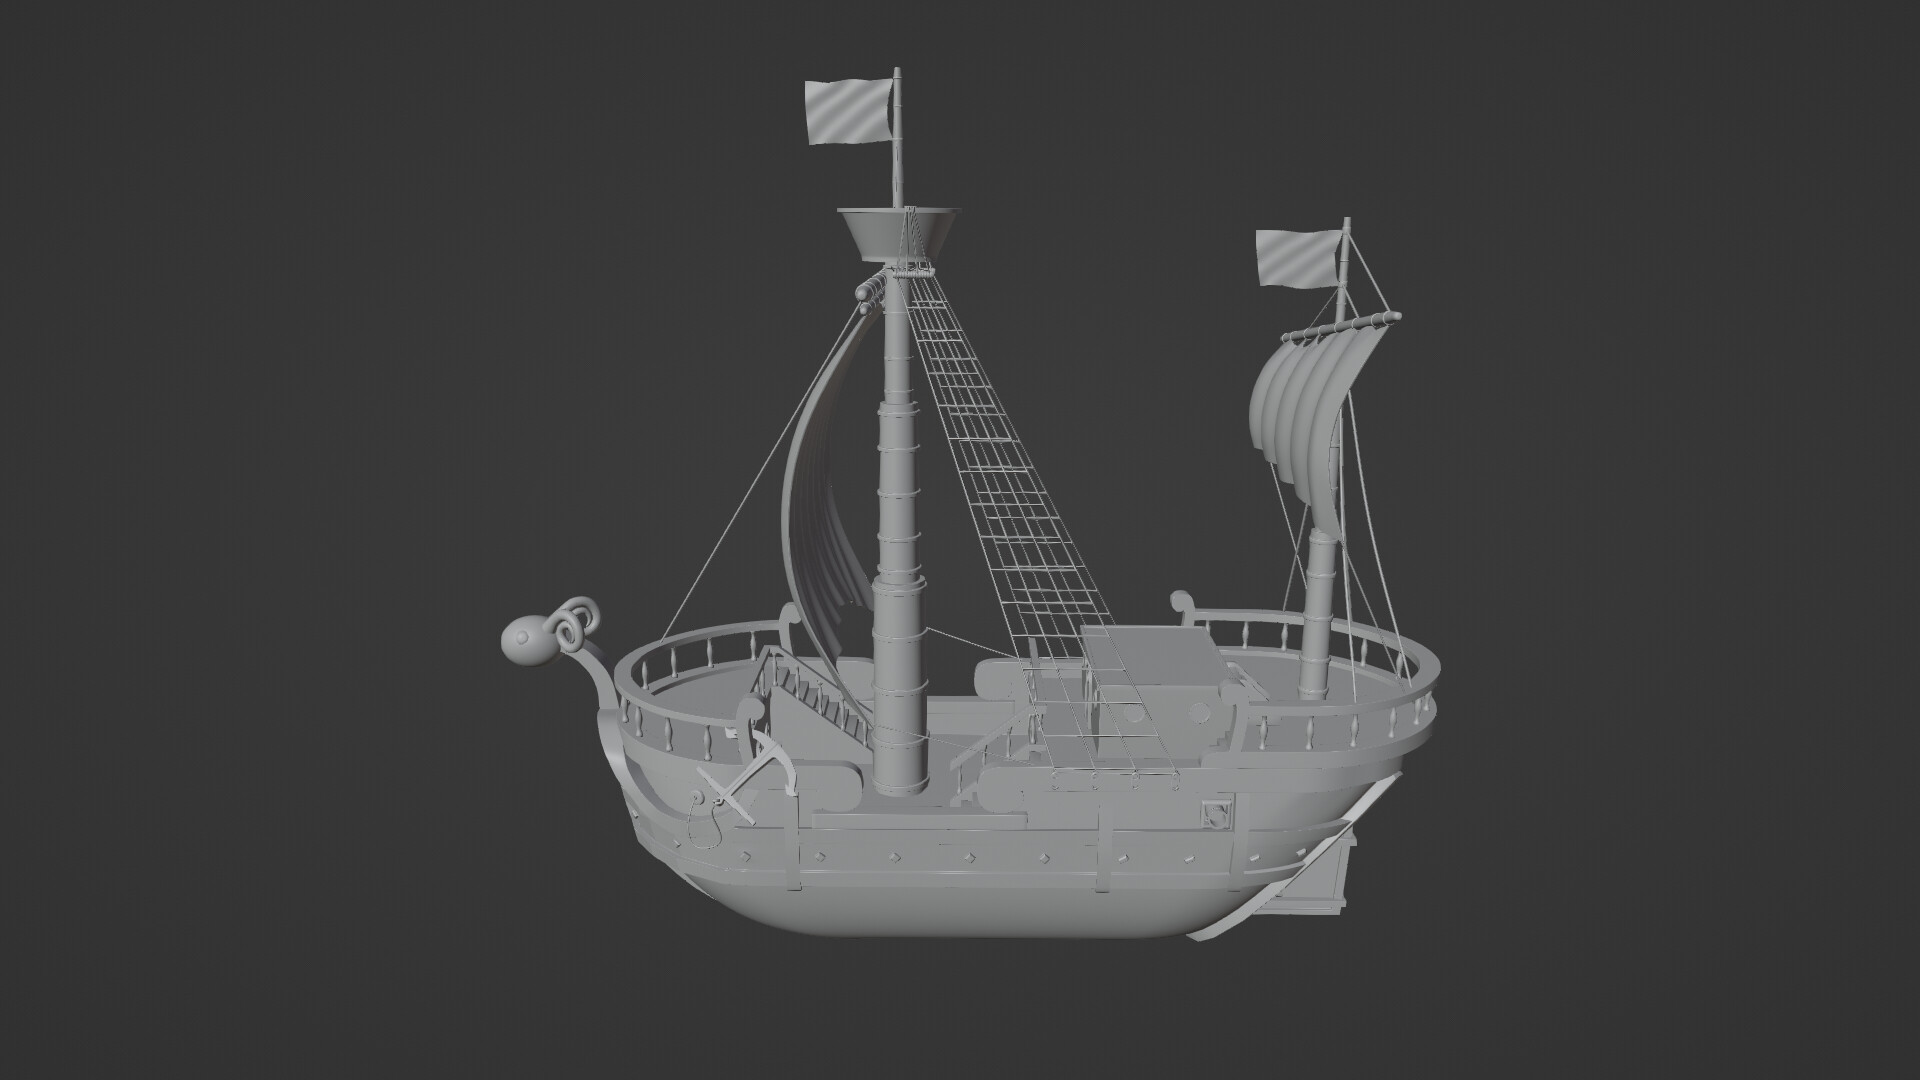 Finally done with going merry(from one piece) after around 40-60 hours.  Would love some feeback - Finished Projects - Blender Artists Community